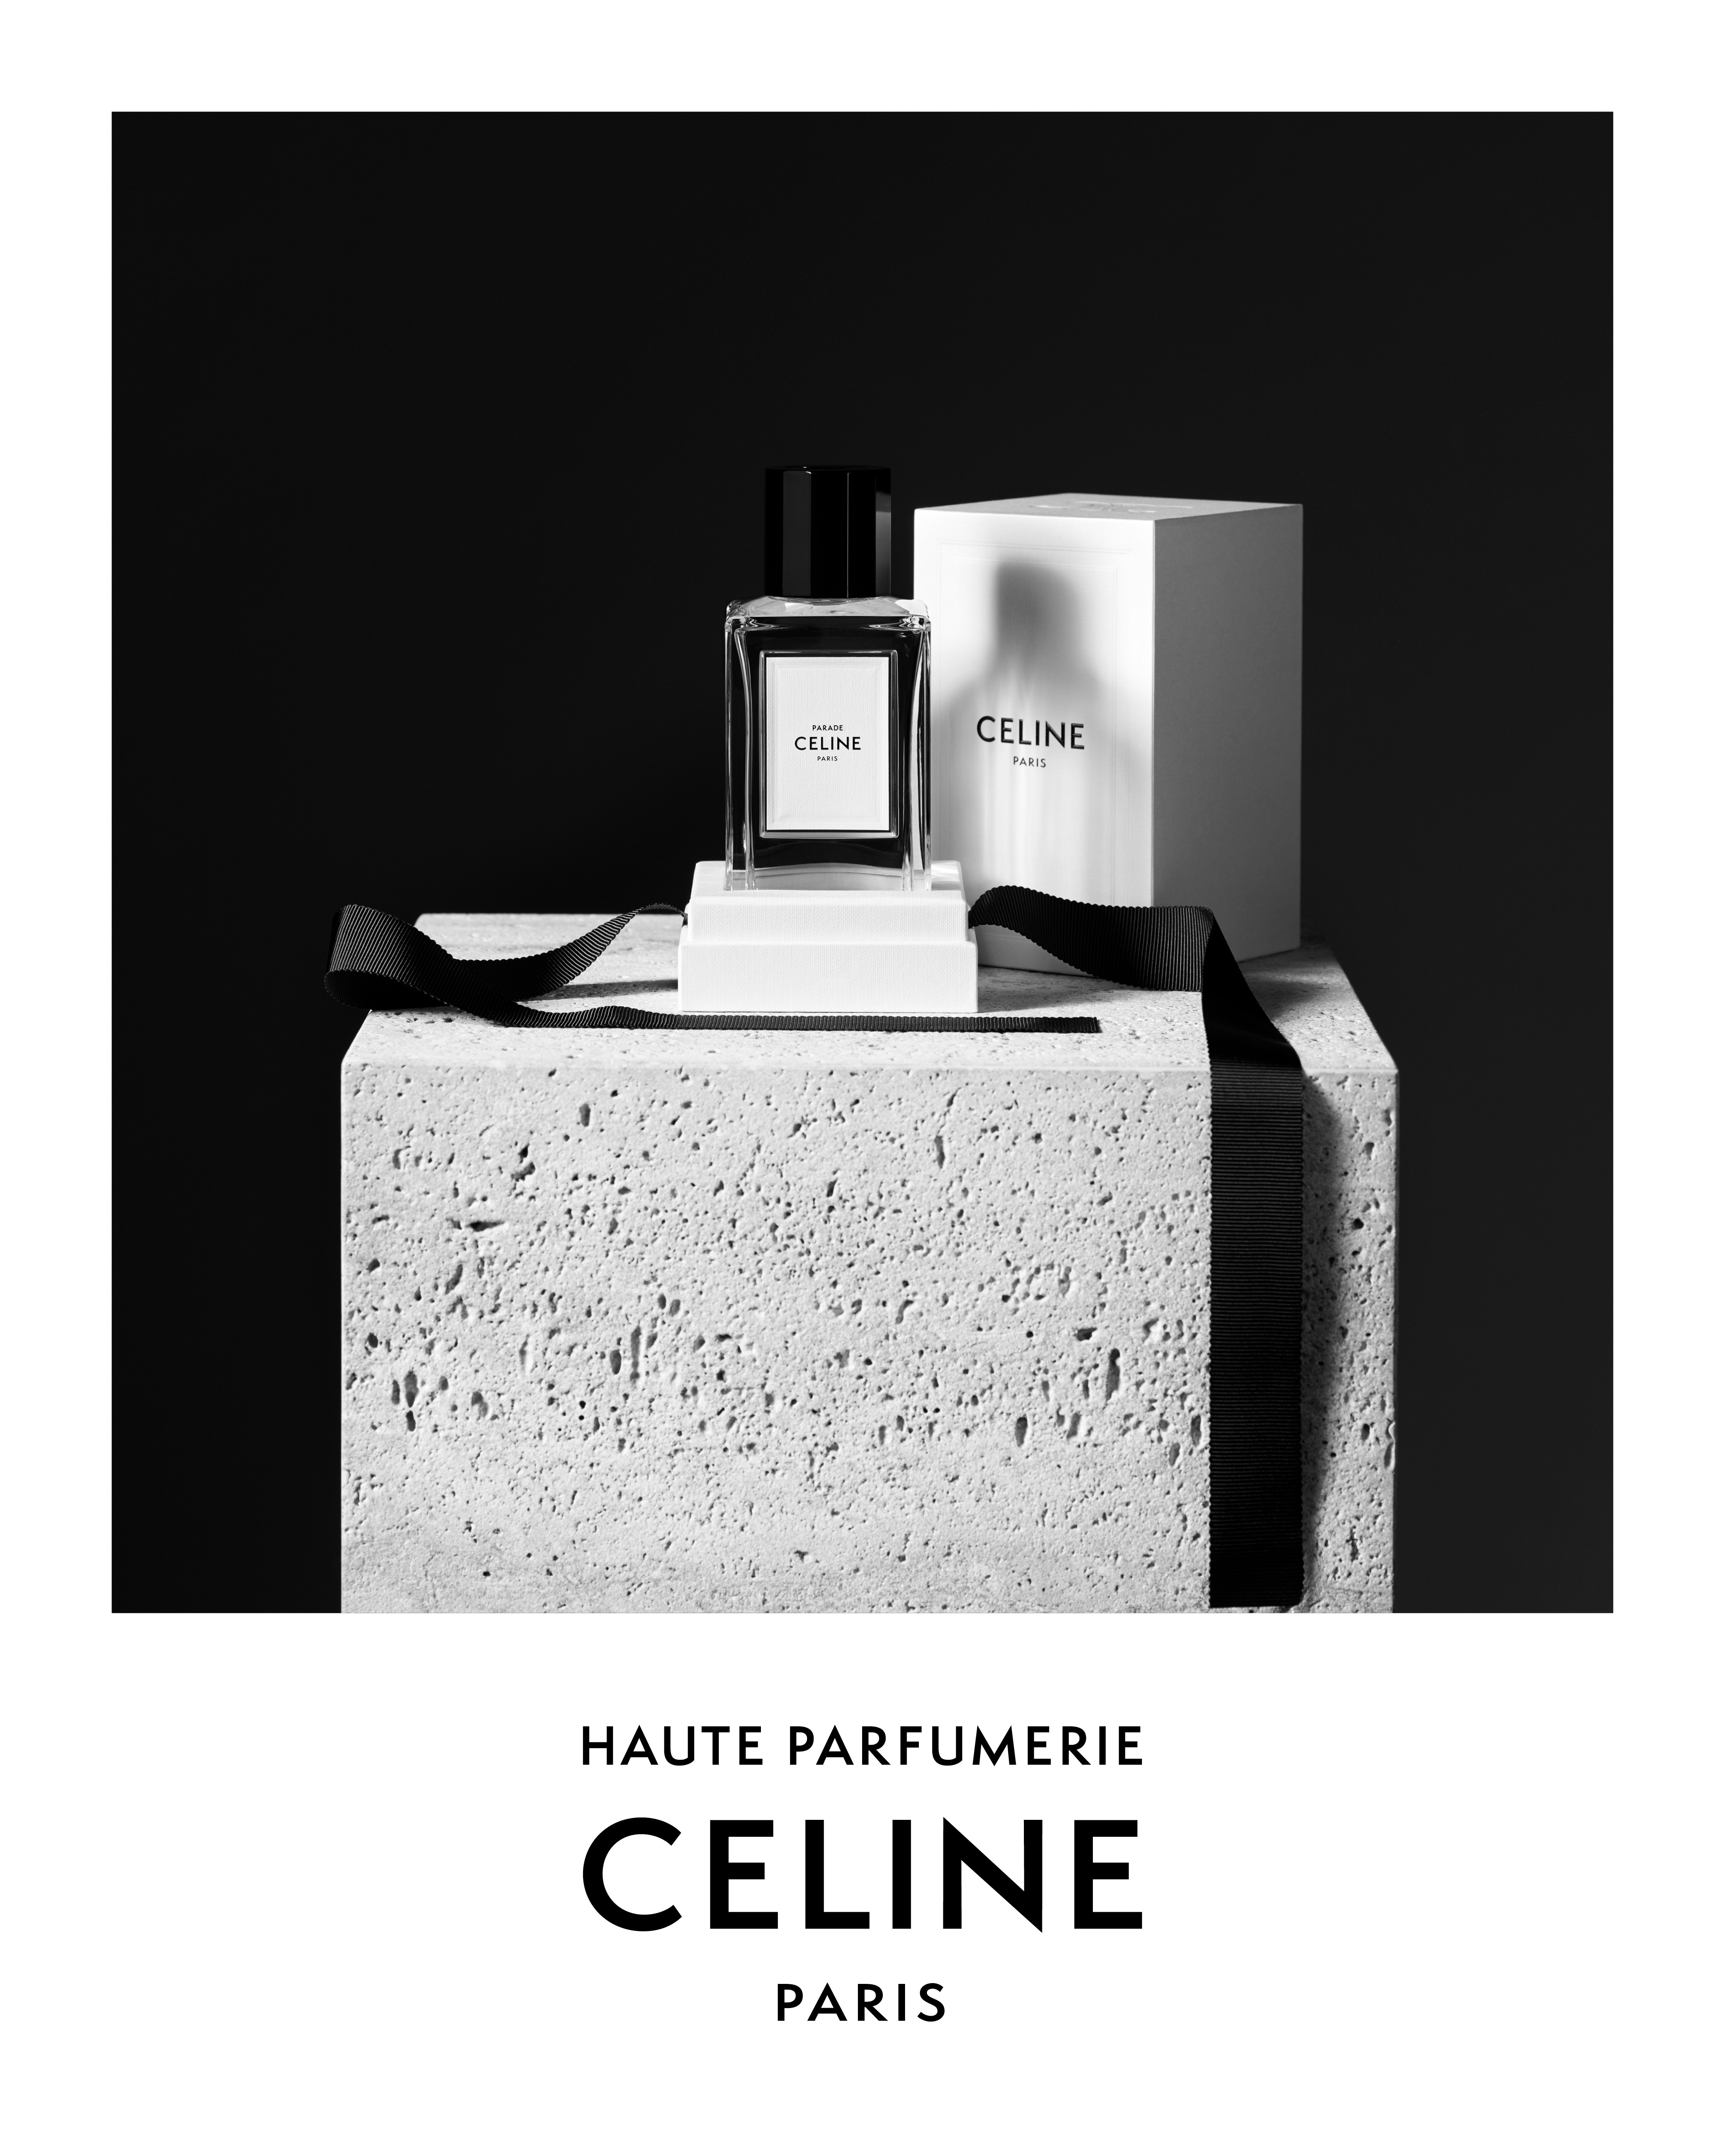 Hedi Slimane reprises tradition of couturier parfumeur with first haute  parfumerie collection for Celine - LVMH